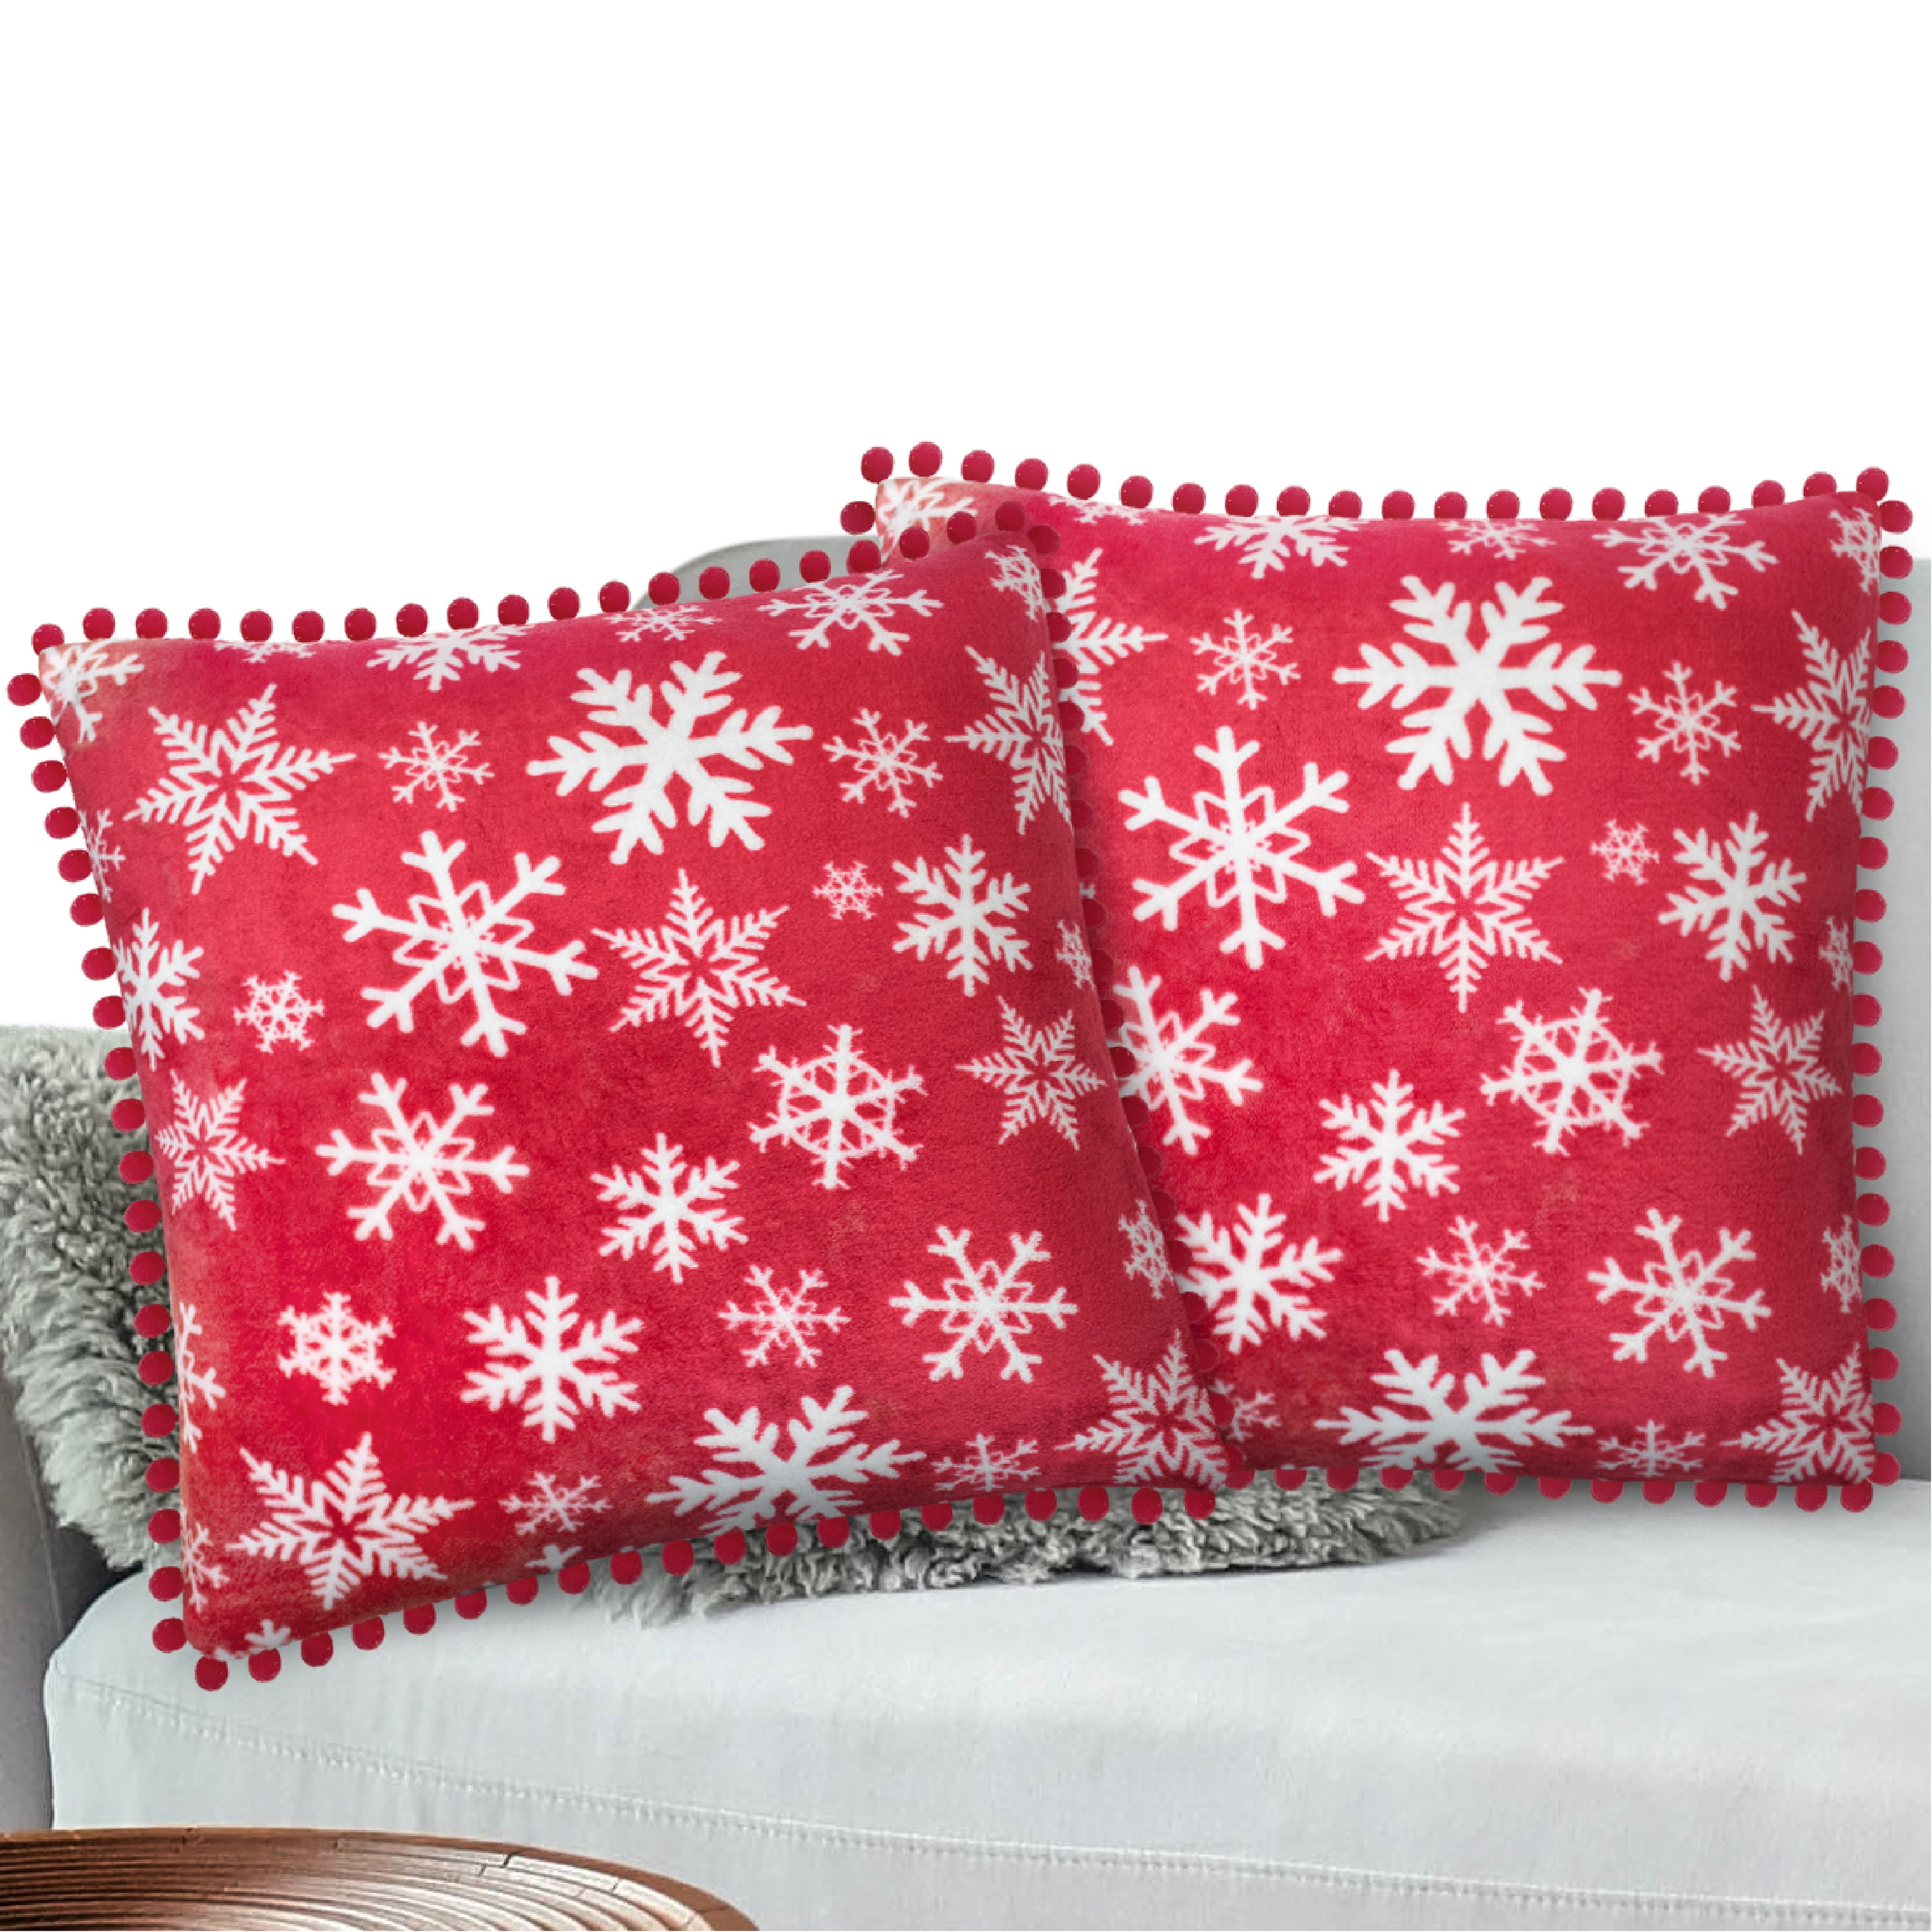 Pavilia Set Of 2 Pom Pom Throw Pillow Covers, Decorative Pompom Fringe  Square Cushion Cases For Couch Sofa Bed : Target